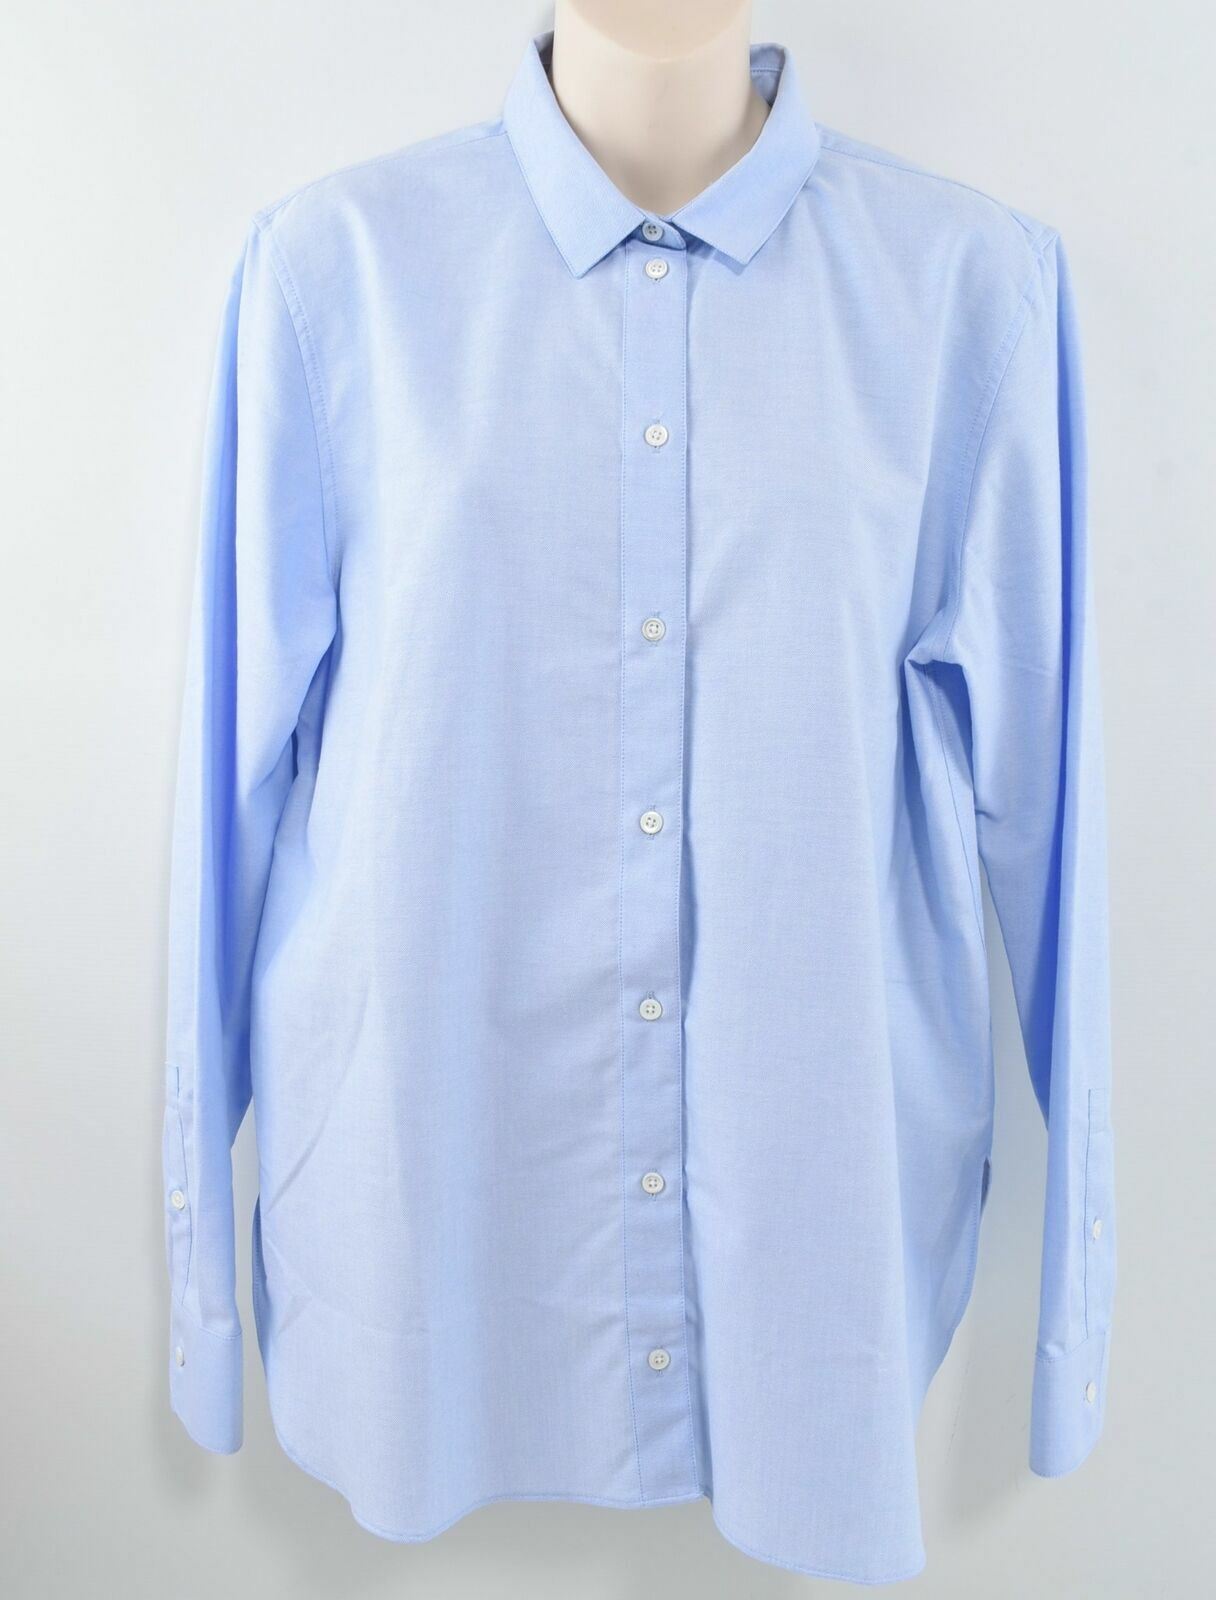 NORSE PROJECTS Women's Pale Blue Long Sleeved Collared Shirt- Size 40 / UK 18